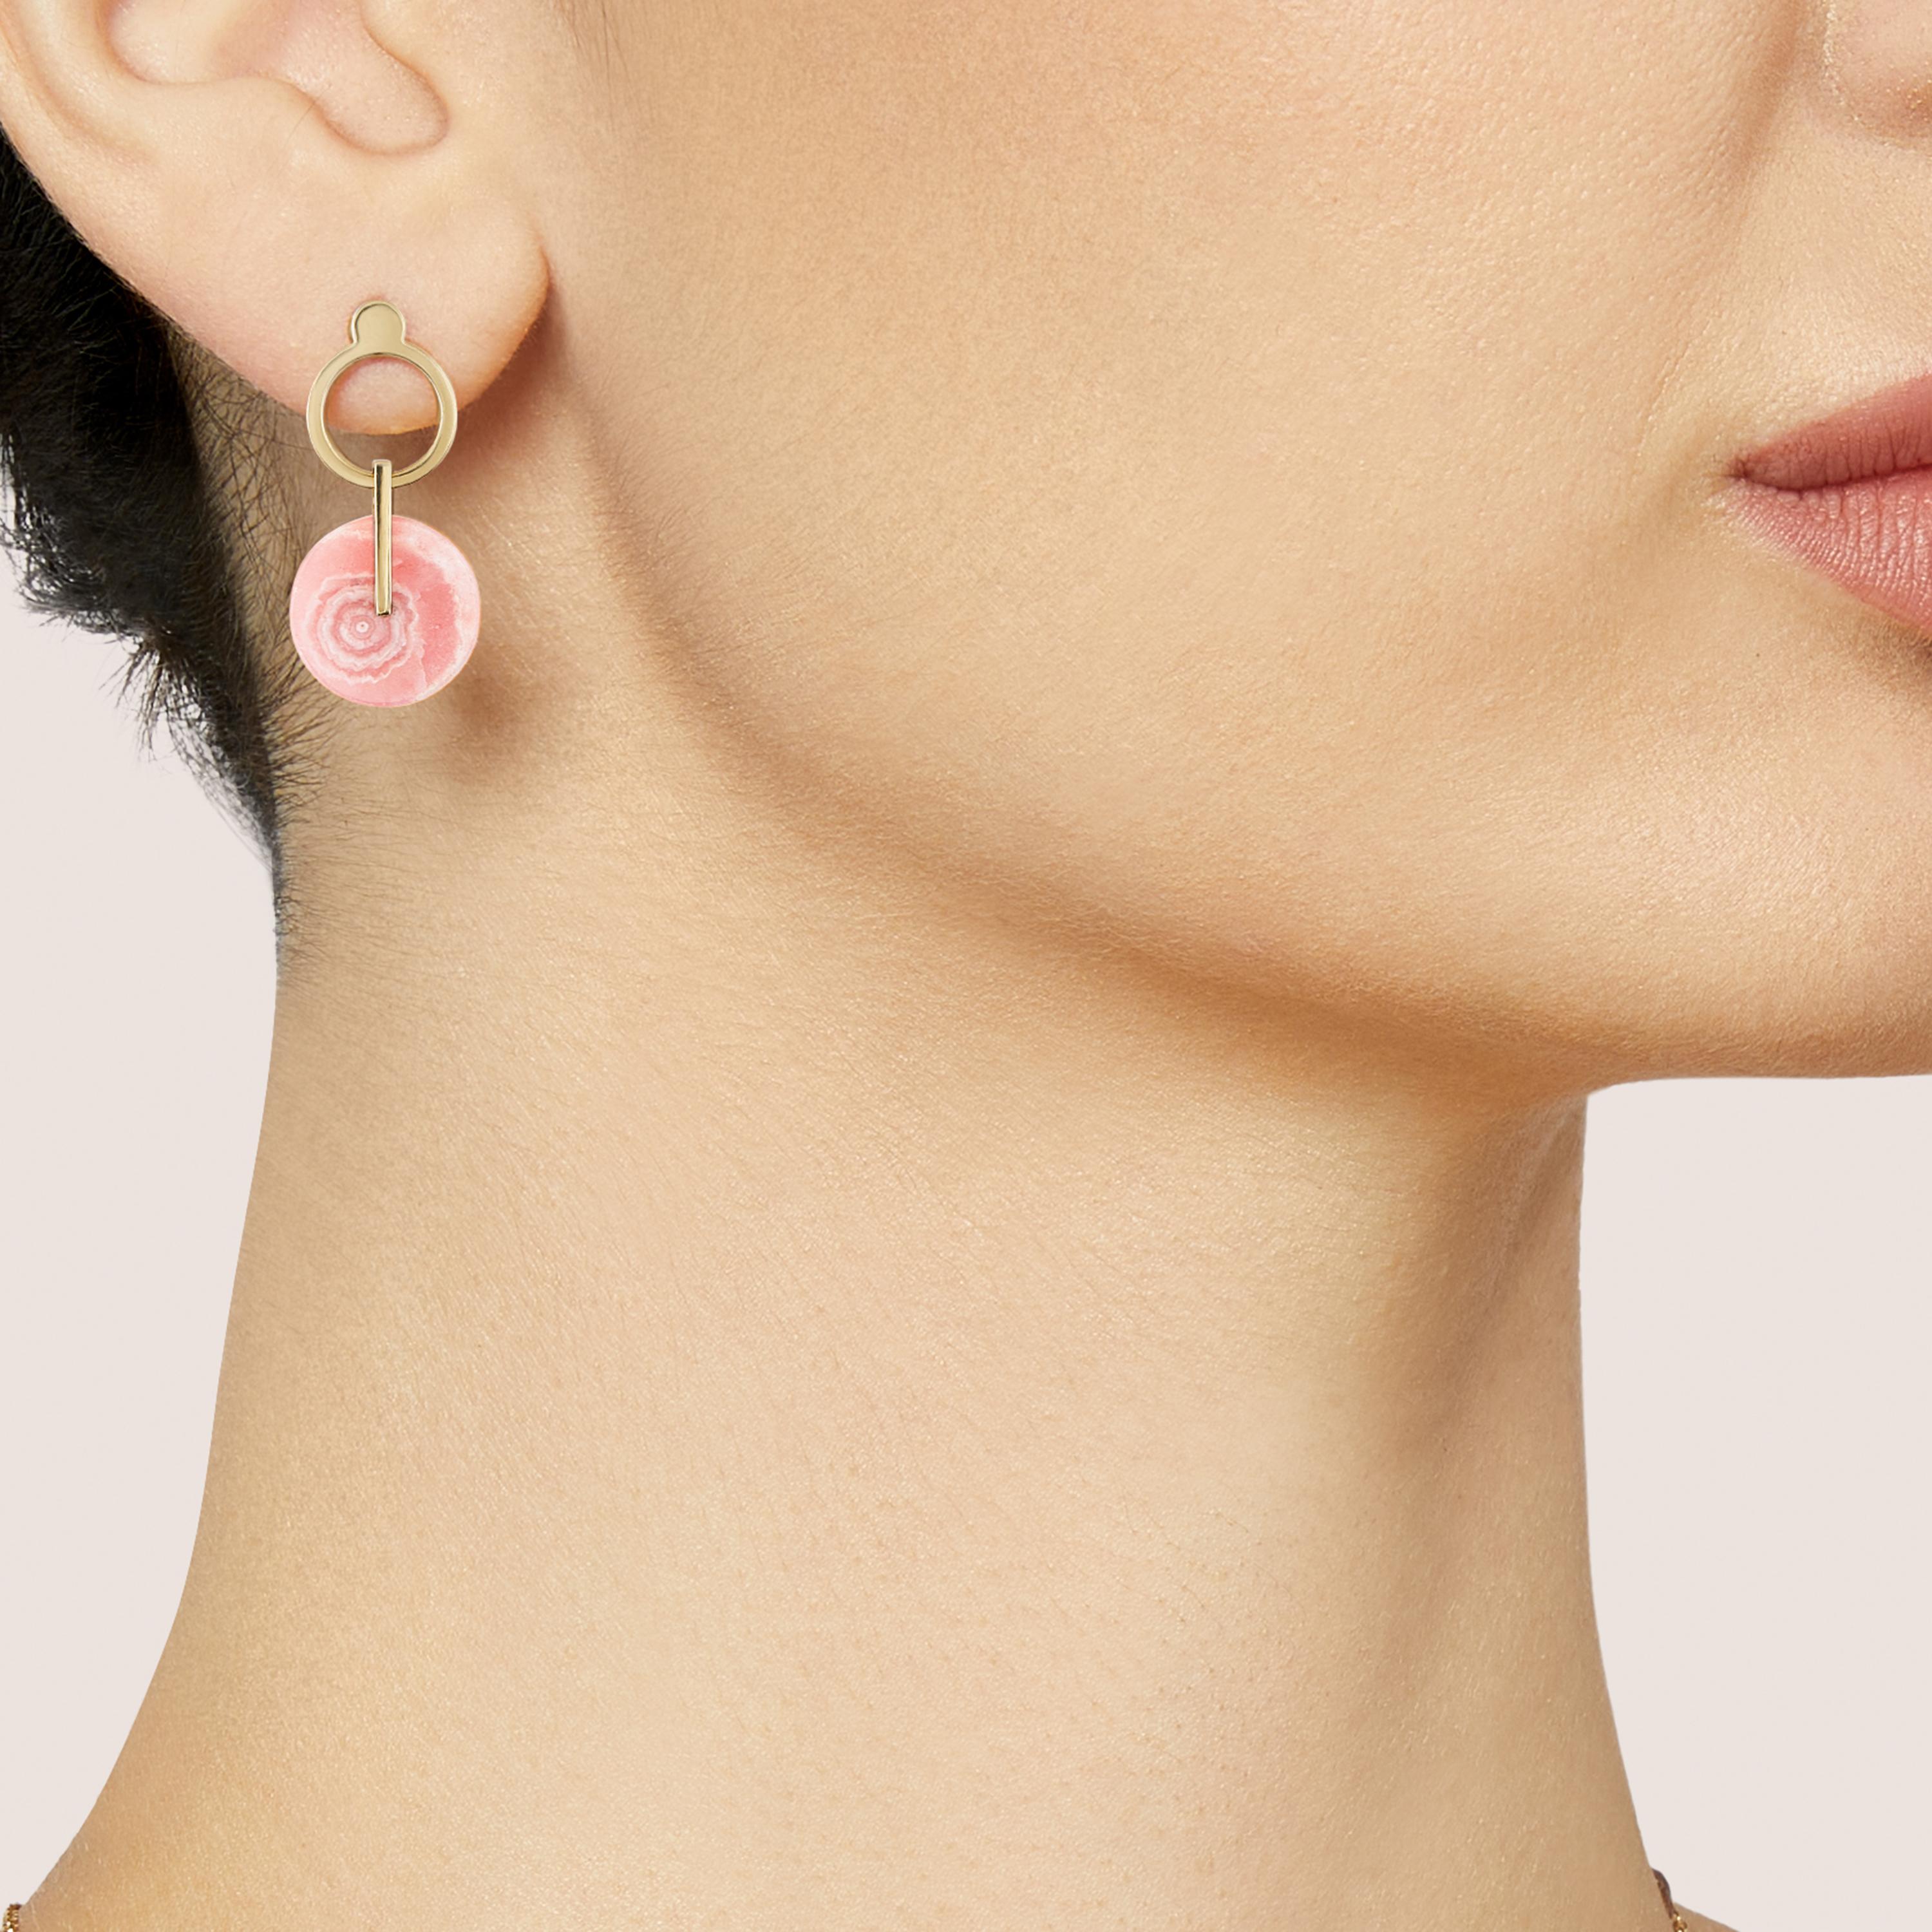 DISCO is a contemporary pair of earrings in 18kt yellow gold and banded rodochrosite.
Rarely found in its pure state, Rhodochrosite is a predominantly rose-red coloured mineral. The more common “banded” form is adorned with linear patterns in